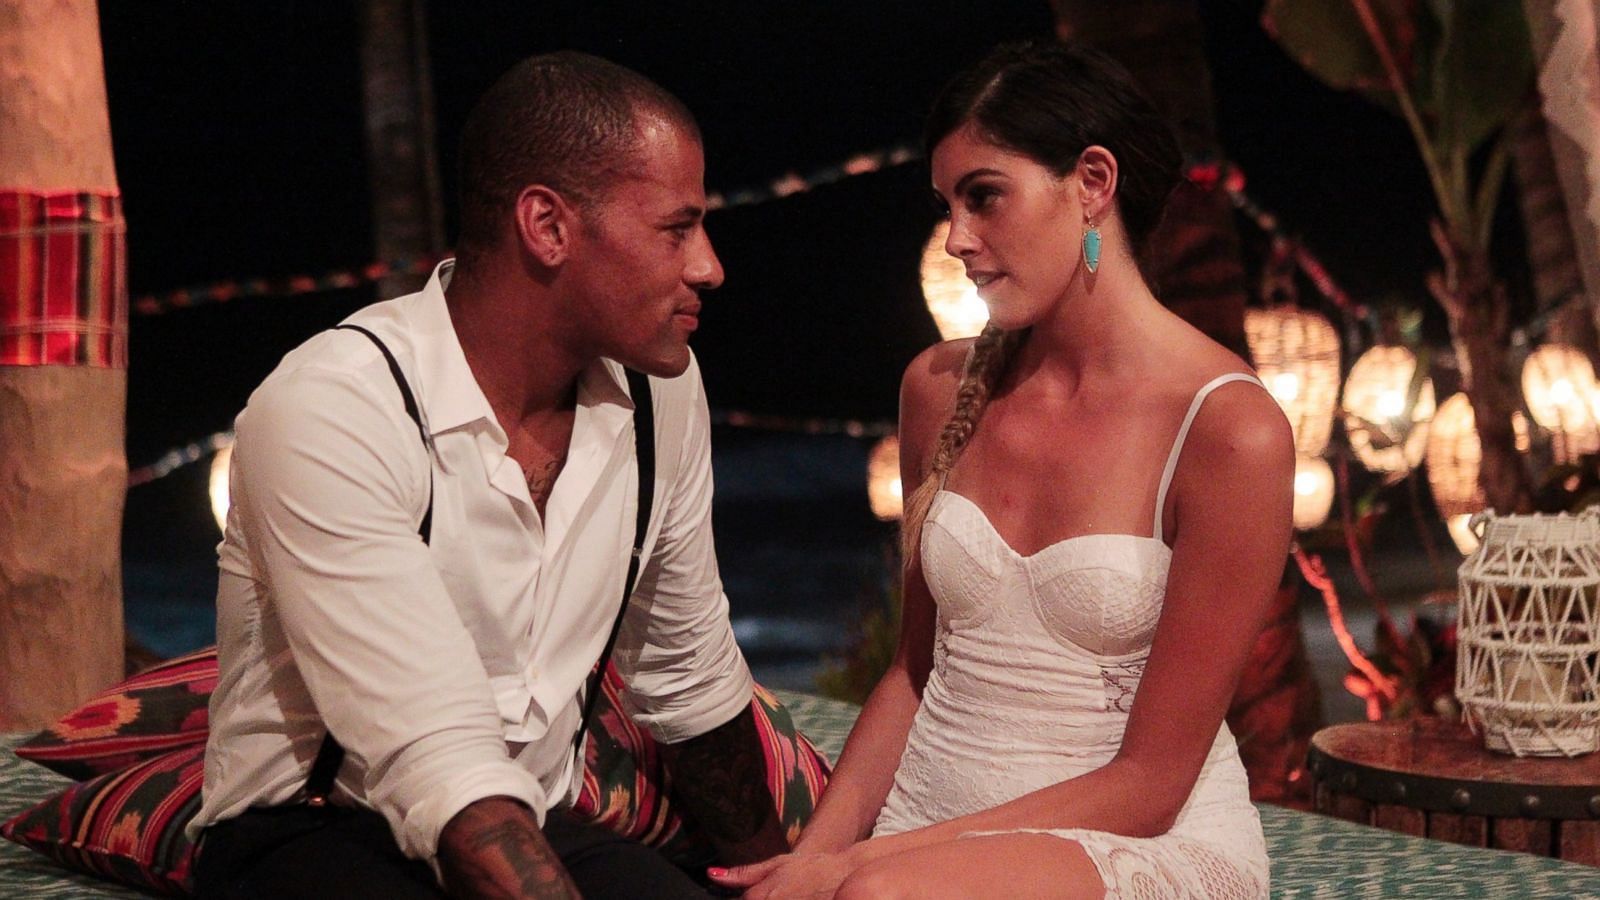 Grant Kemp and Lace Morris in an episode of Bachelor in Paradise season 3 (Image via ABC )